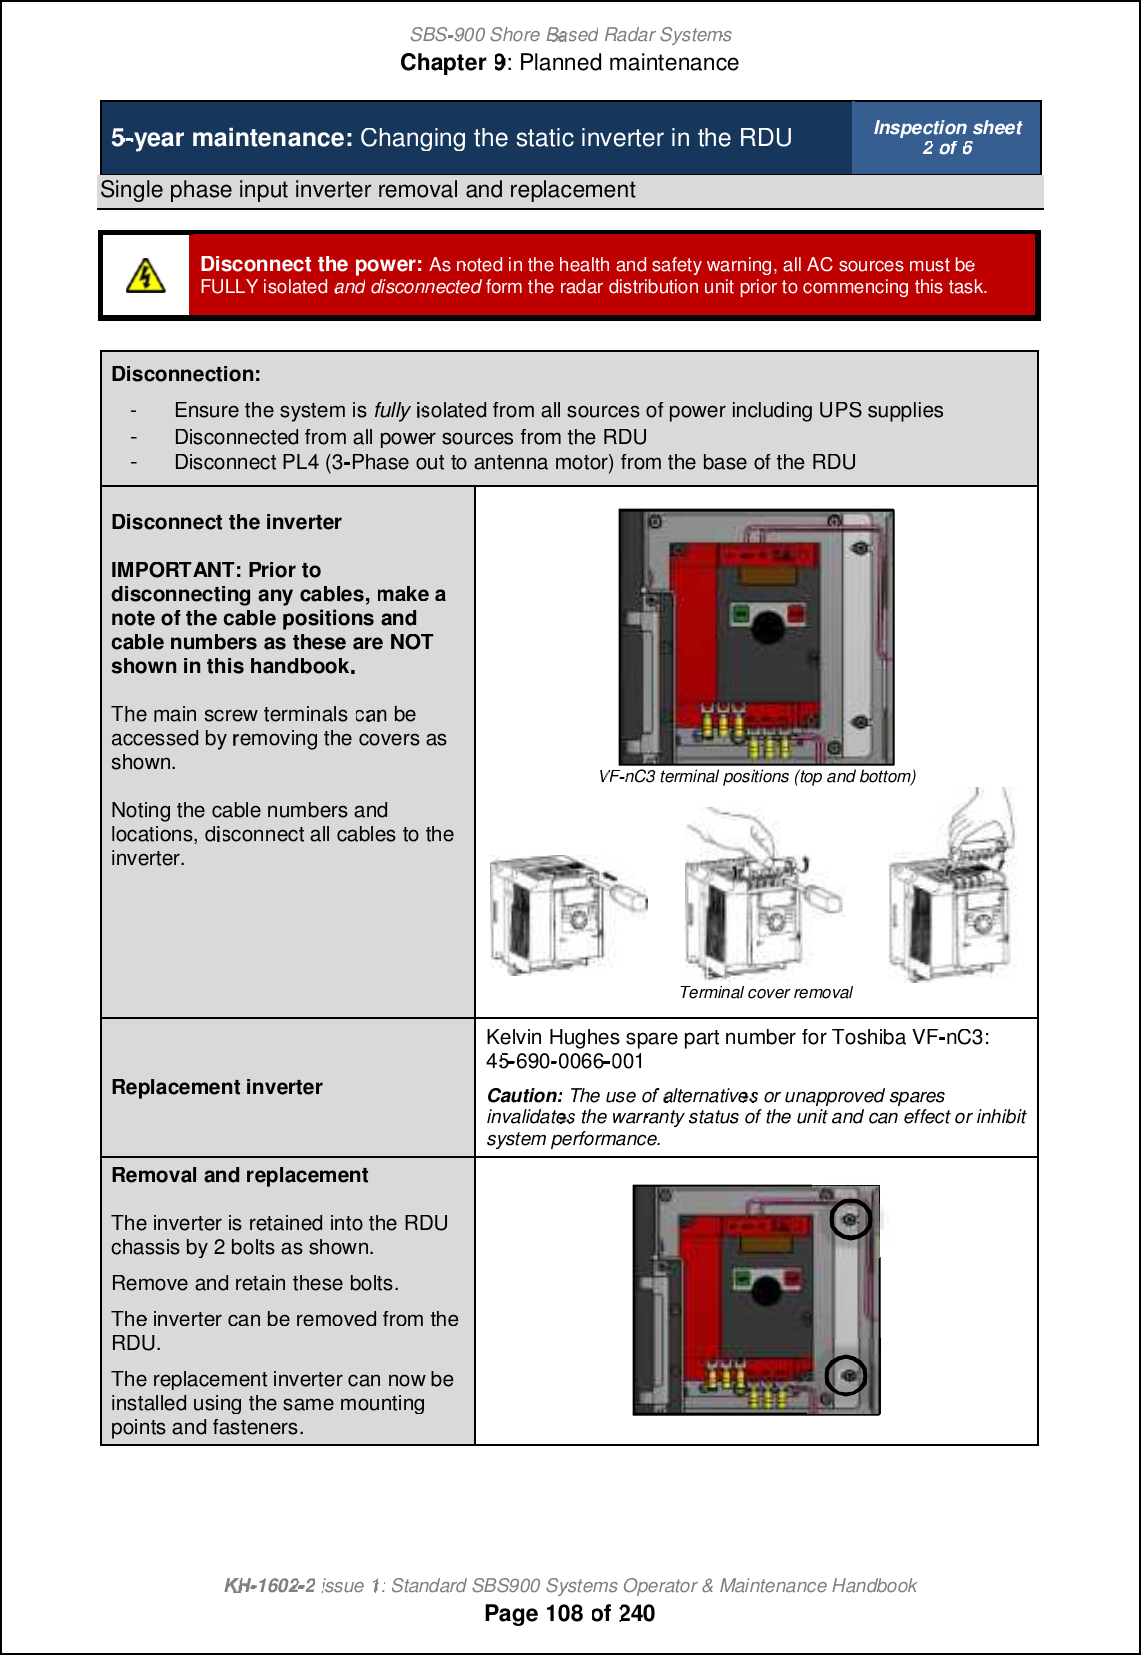 SBS-900 ShoreBaBasedRadar SystemsChapter9:Planned maintenanceKHKH-1602 2issue 1:Standard SBS900 Systems Operator &amp; Maintenance HandbookPage108of2405-year maintenance:Changing the static inverter in the RDUInspection sheet2of6Single phase input inverter removal and replacementDisconnect the power:As noted in the health and safety warning, all AC sources must beFULLY isolatedanddisconnectedform the radar distribution unit prior to commencing this task.Disconnection:-Ensure the system isfullyisolated from all sources of power including UPS supplies-Disconnected from all power sources from the RDU-Disconnect PL4 (3-Phase outto antenna motor) from the base of the RDUDisconnect the inverterIMPORTANT:Prior todisconnectingany cables,make anote of thecablepositionsandcable numbers as these are NOTshown in this handbookThemainscrew terminalscan beaccessed byremoving the covers asshown.Noting the cable numbers andlocations, disconnect all cables to theinverter.VFVF-nC3 terminal positions (top and bottom)Terminal cover removalReplacement inverterKelvin Hughes spare part numberfor Toshiba VF-nC3:4545-690-0066001Caution:The use ofalternativesor unapproved sparesinvalidatesthe warranty status of the unit and can effect or inhibitsystem performance.Removaland replacementThe inverter is retained into the RDUchassis by 2 bolts as shown.Remove and retain these bolts.The inverter can be removed from theRDU.The replacement inverter can now beinstalled using the same mountingpoints and fasteners.